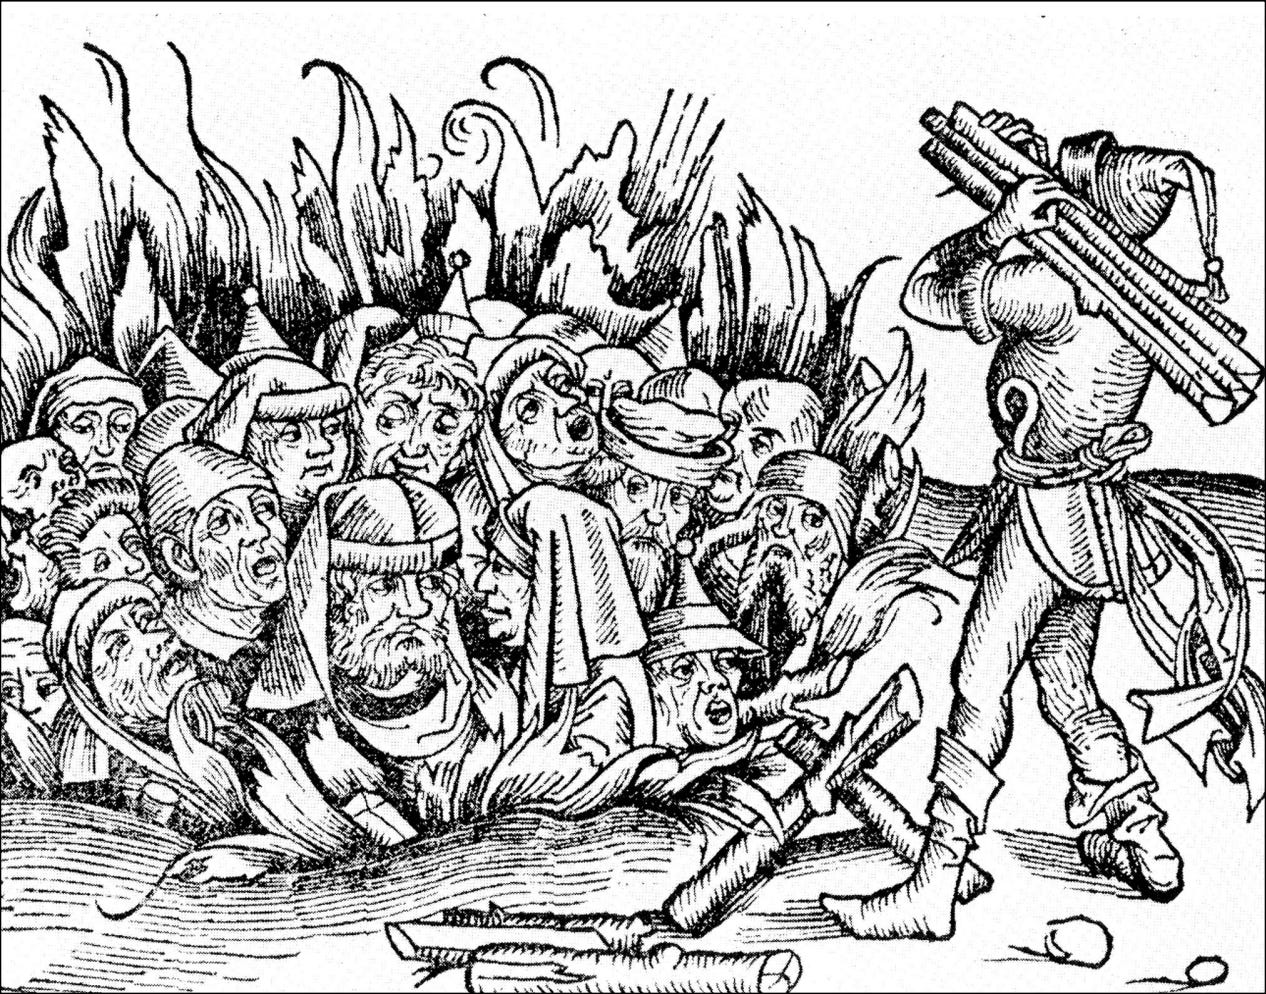 A B&W medieval illustration of the burning of Jews during the Black Plague